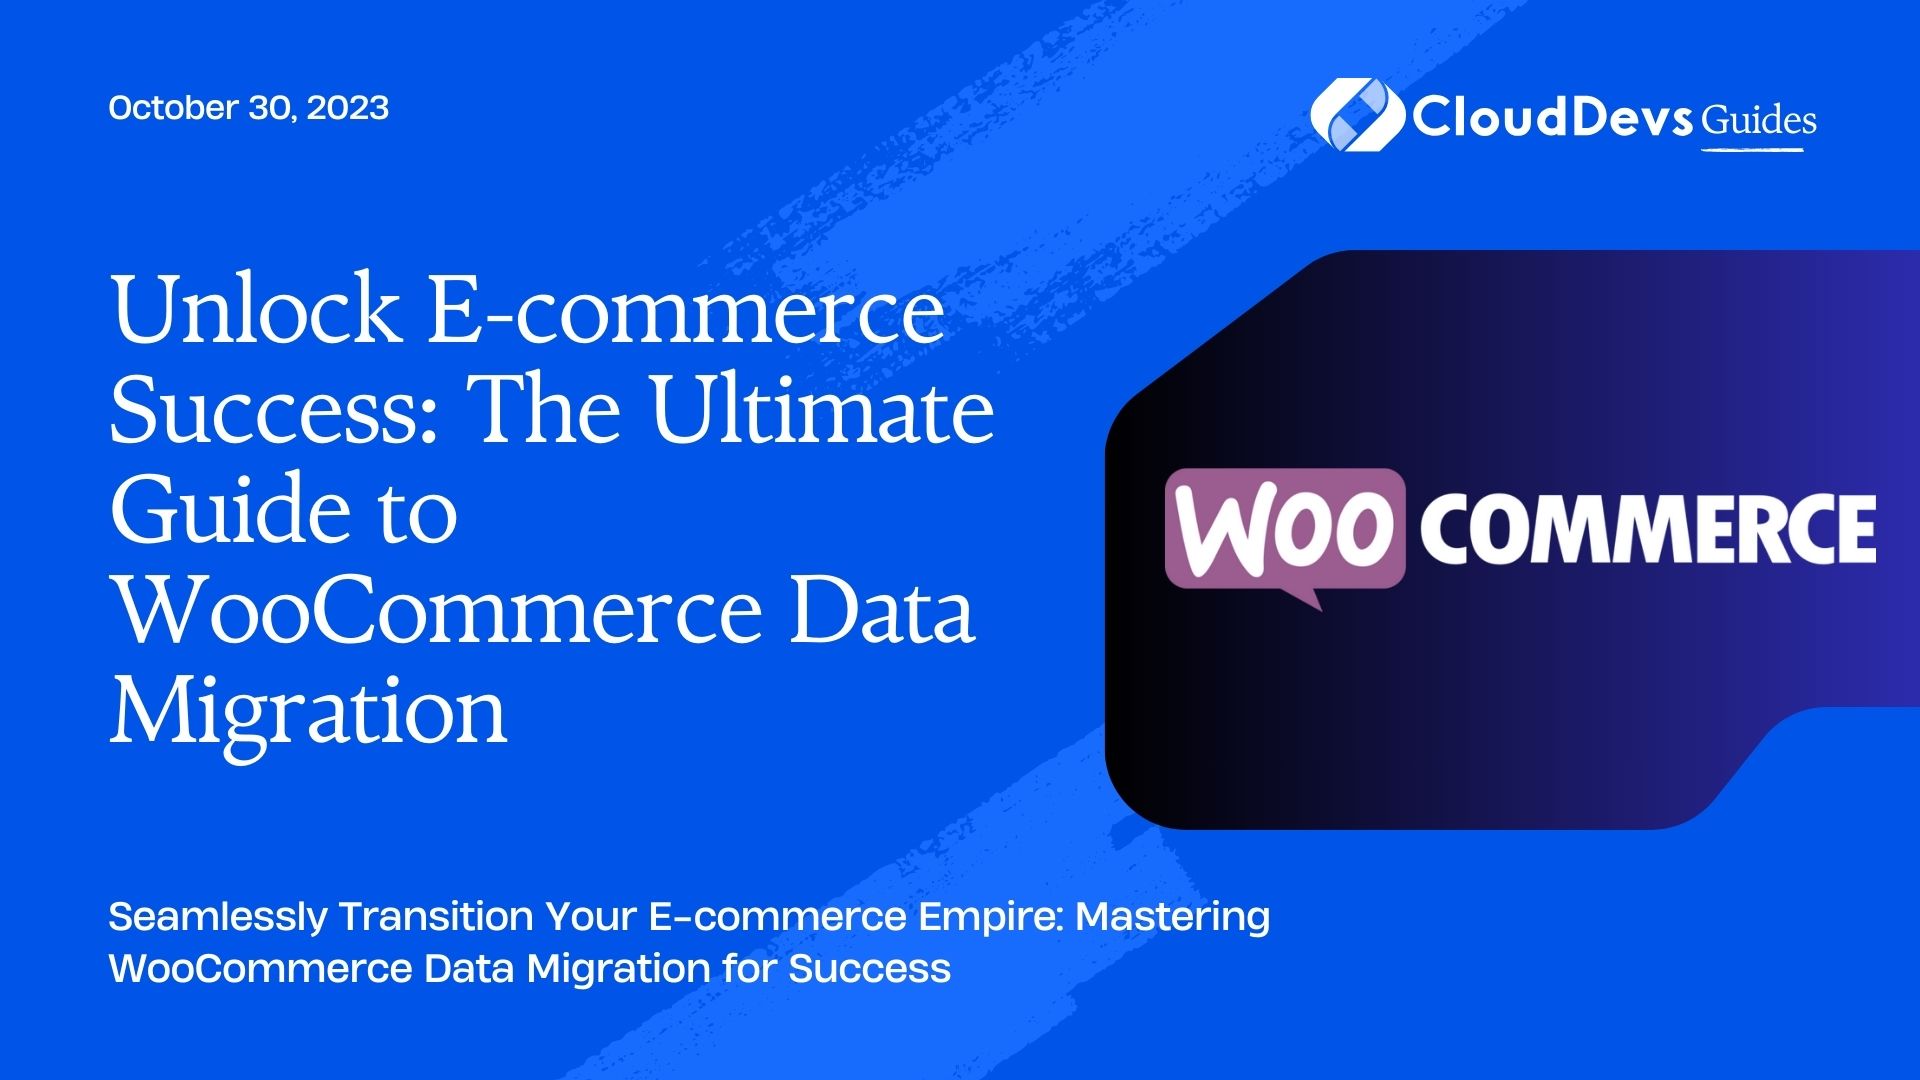 Unlock E-commerce Success: The Ultimate Guide to WooCommerce Data Migration